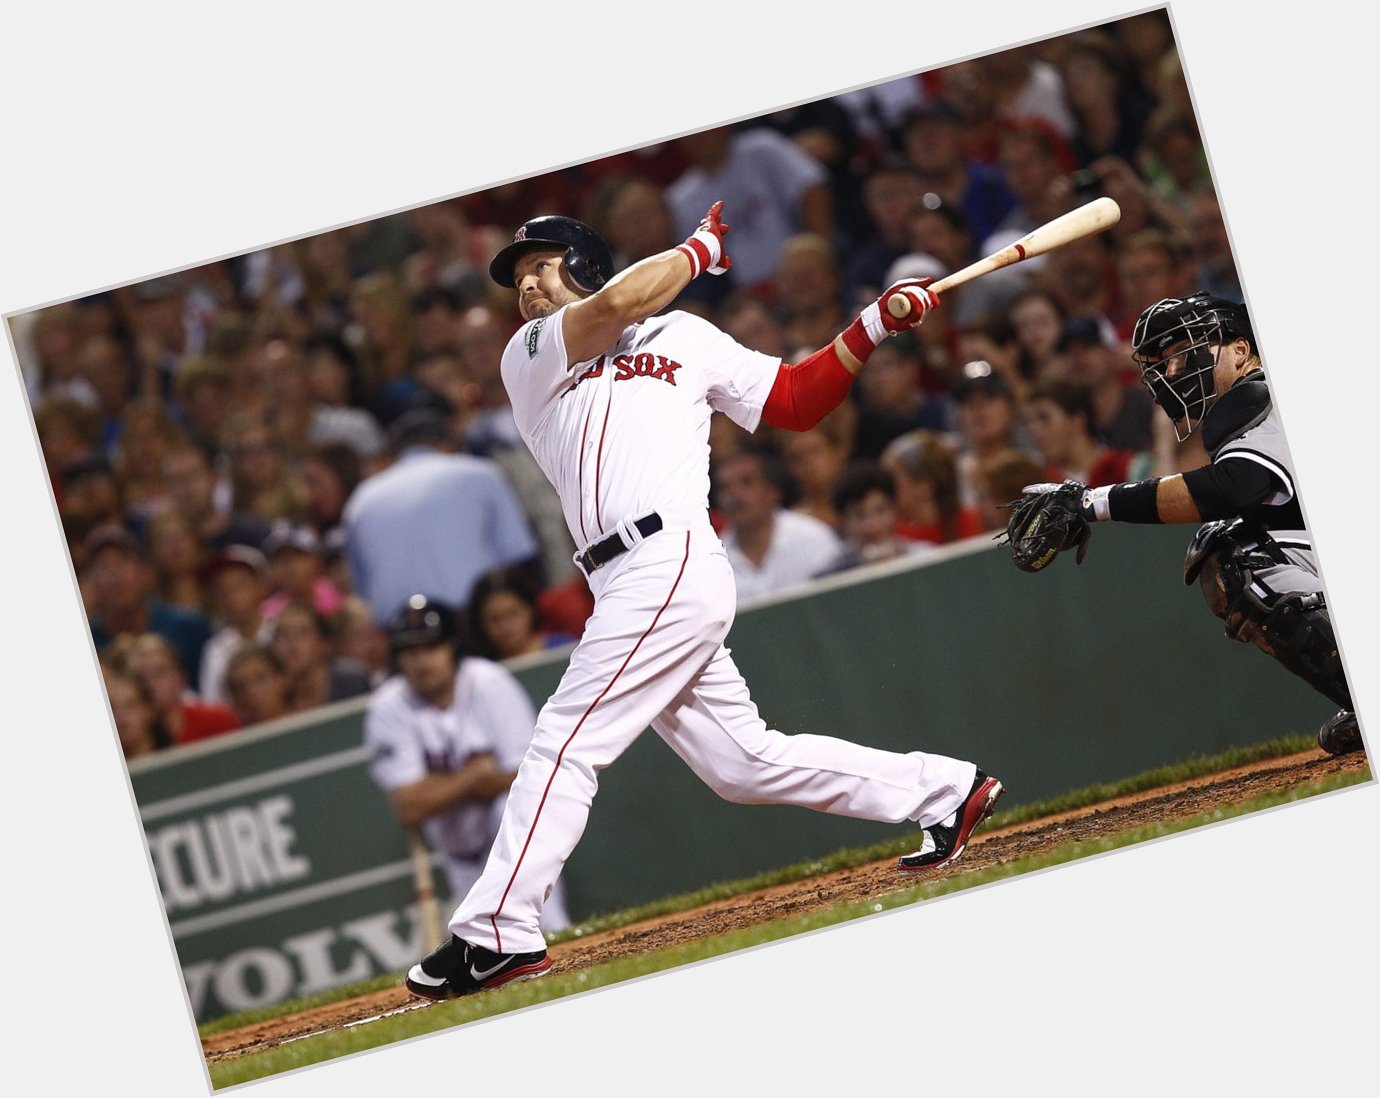 Happy 37th bday to Cody Ross! Hit .267 with 22 HR & 81 RBI for the Sox in 2012. 162 game avg for career of 20 HR. 